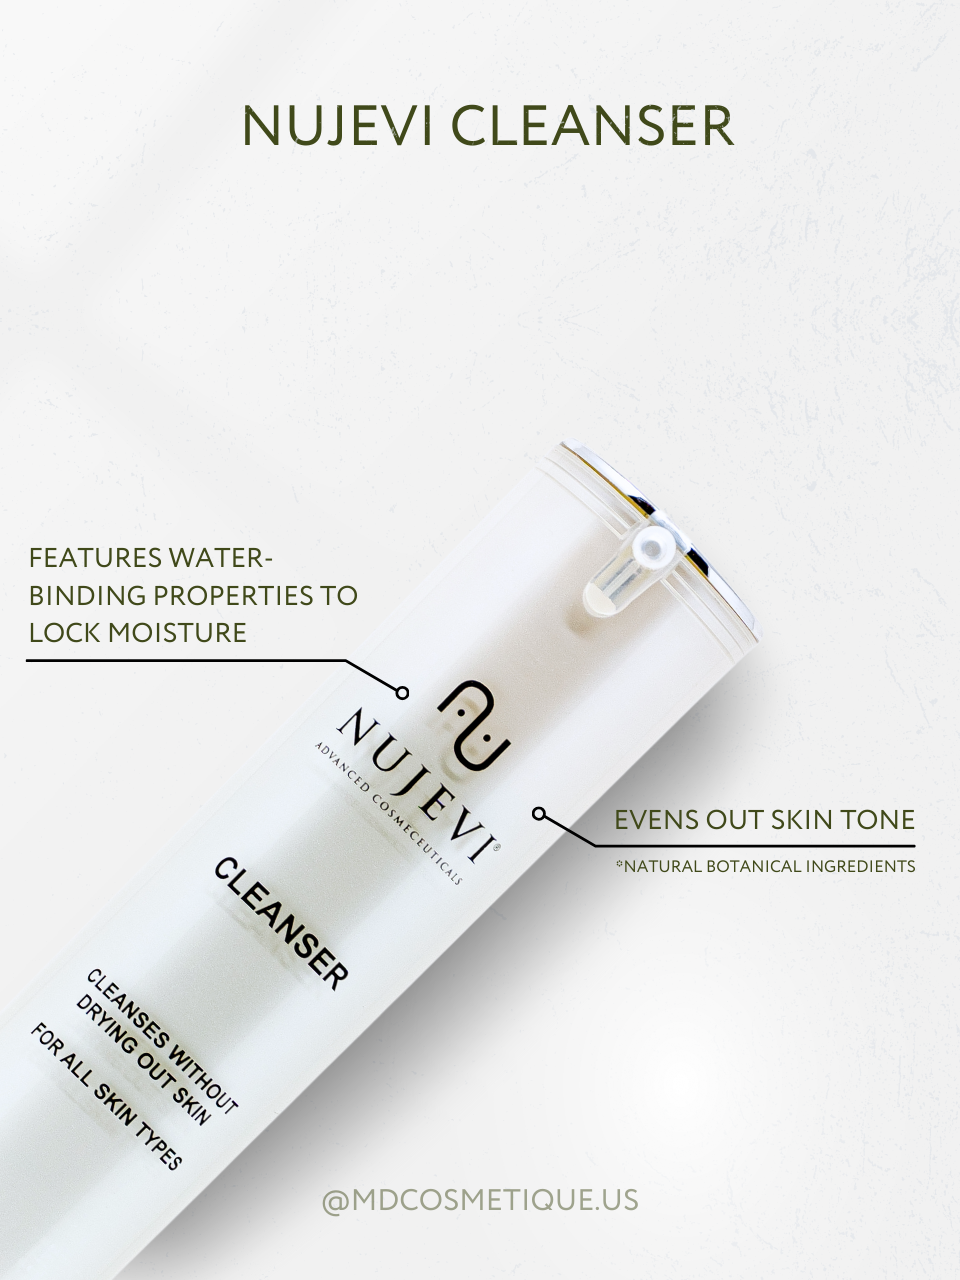 Bottle of face cleanser tube showing product properties: "Lock Moisture", Evens Out Skin Tone".